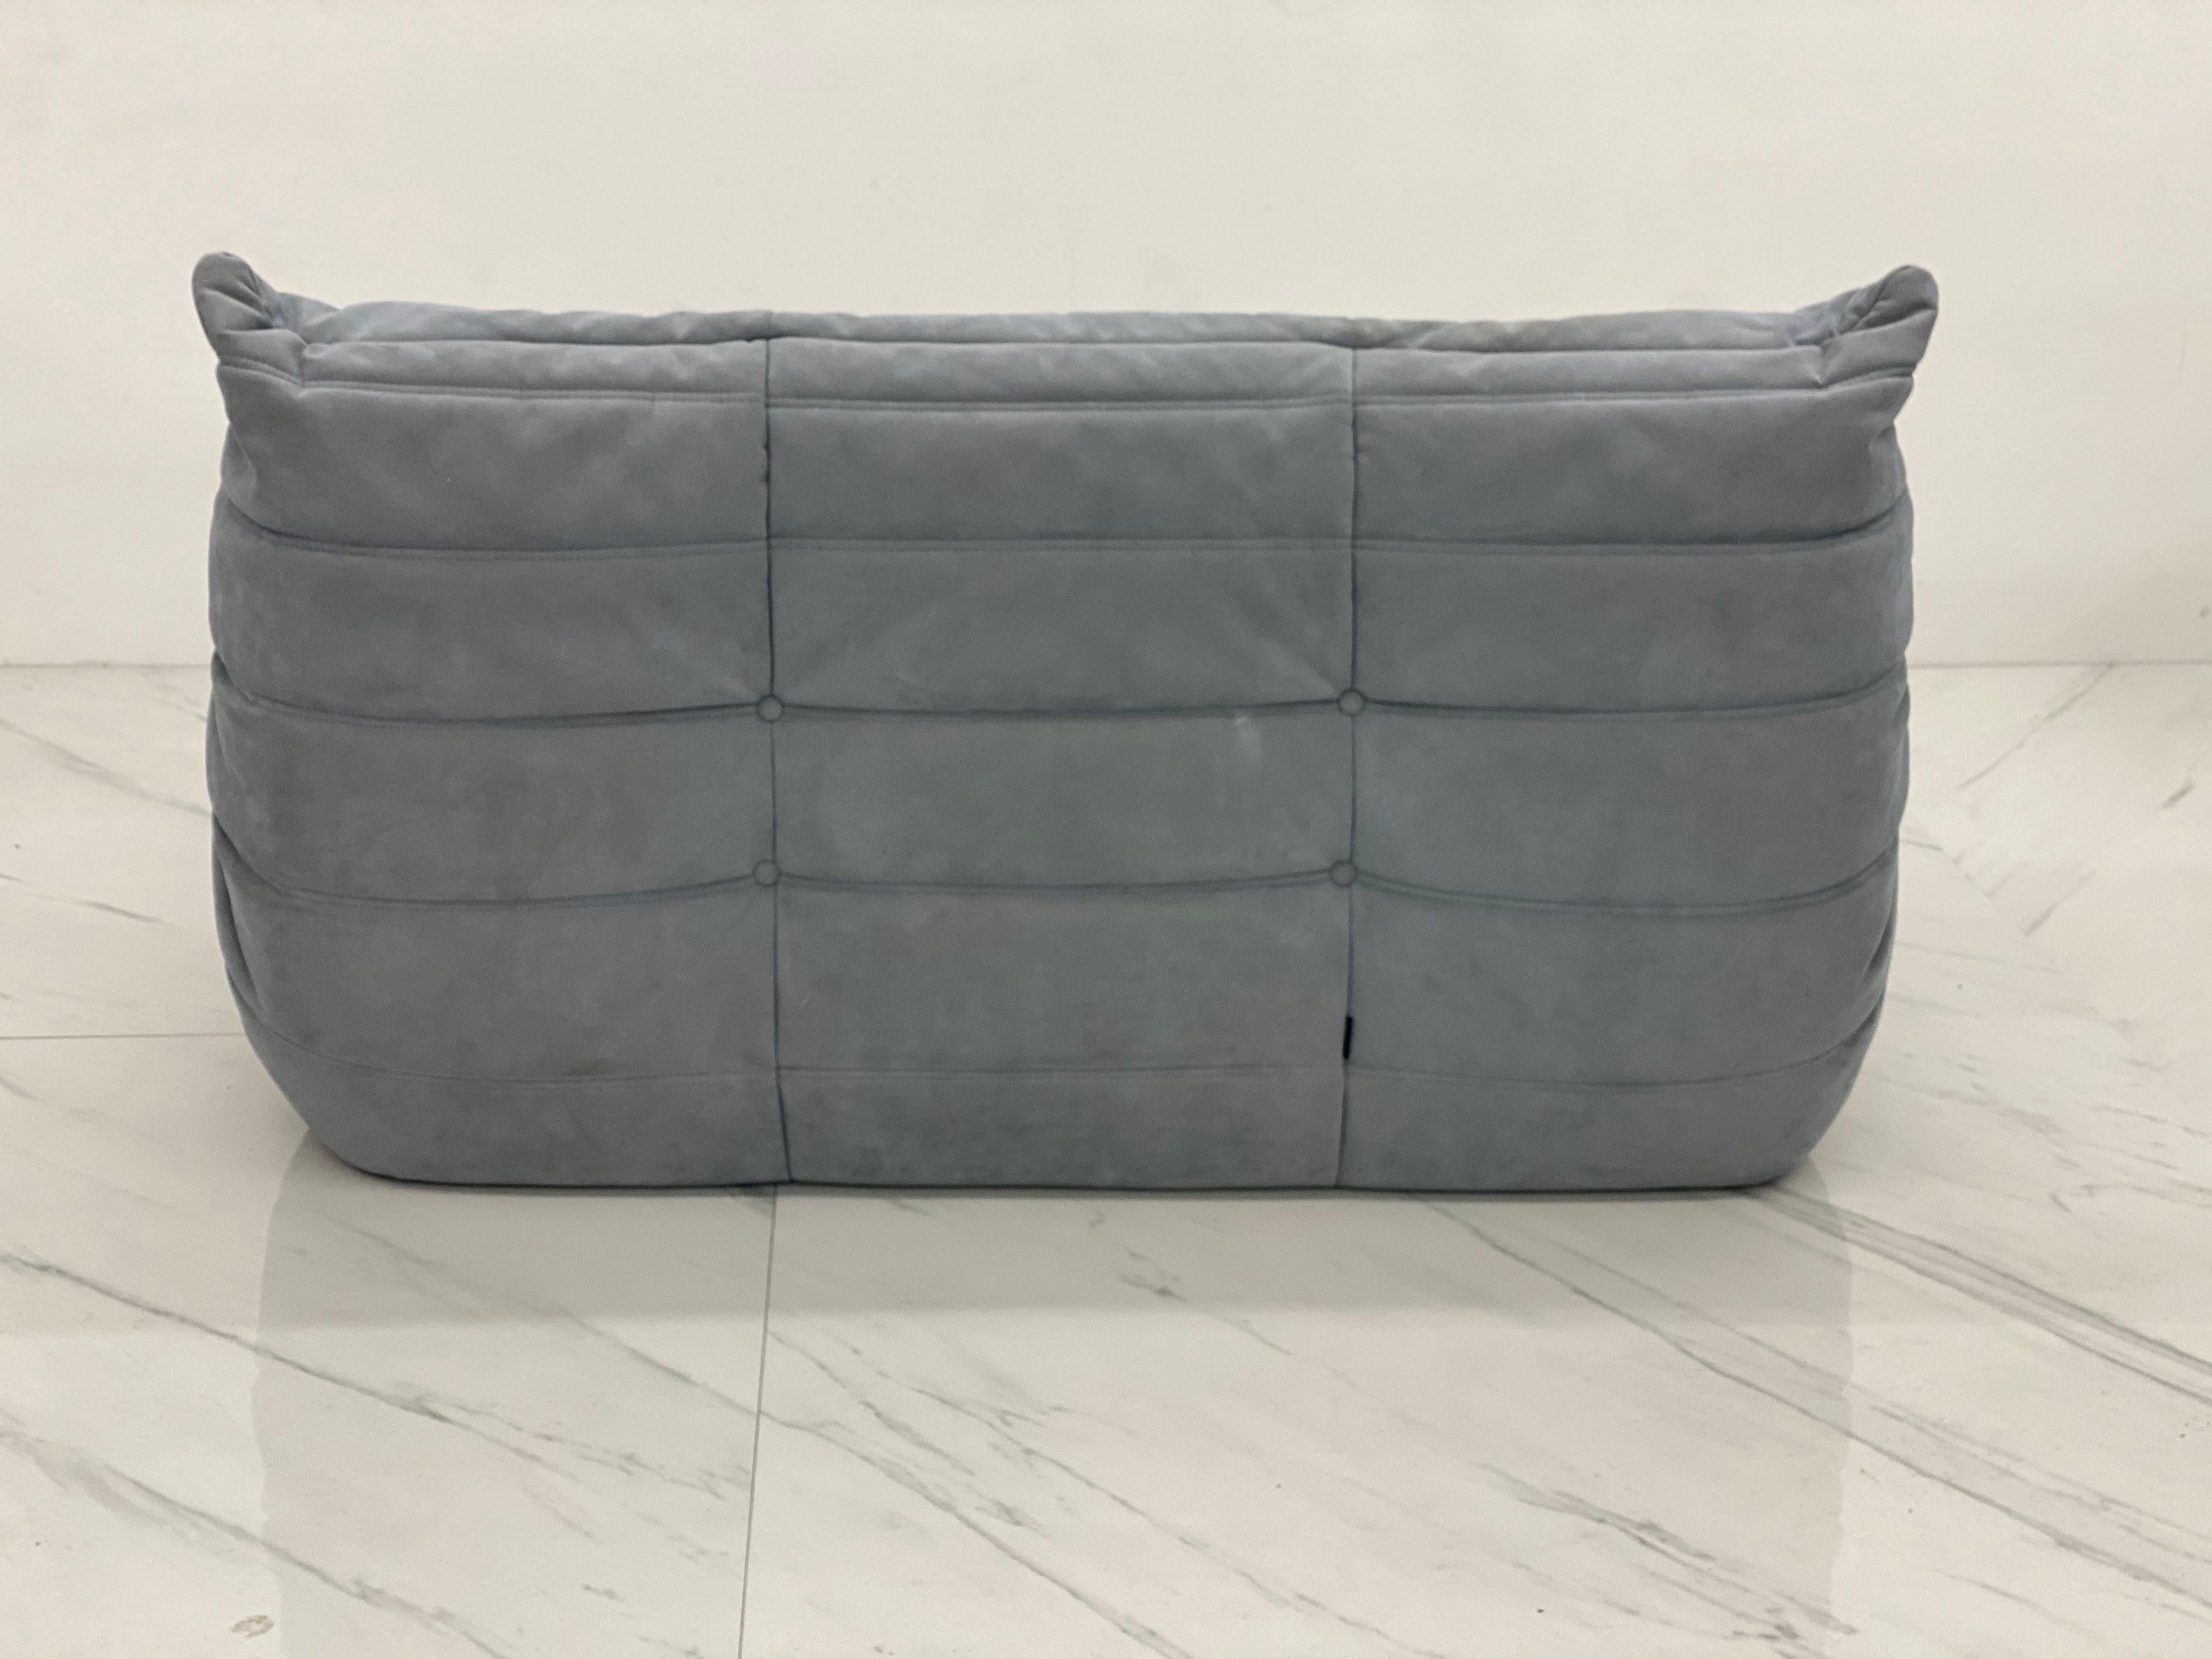 Baby Blue 'Togo' Sectional Sofa by Michel Ducaroy for Ligne Roset, Signed 1